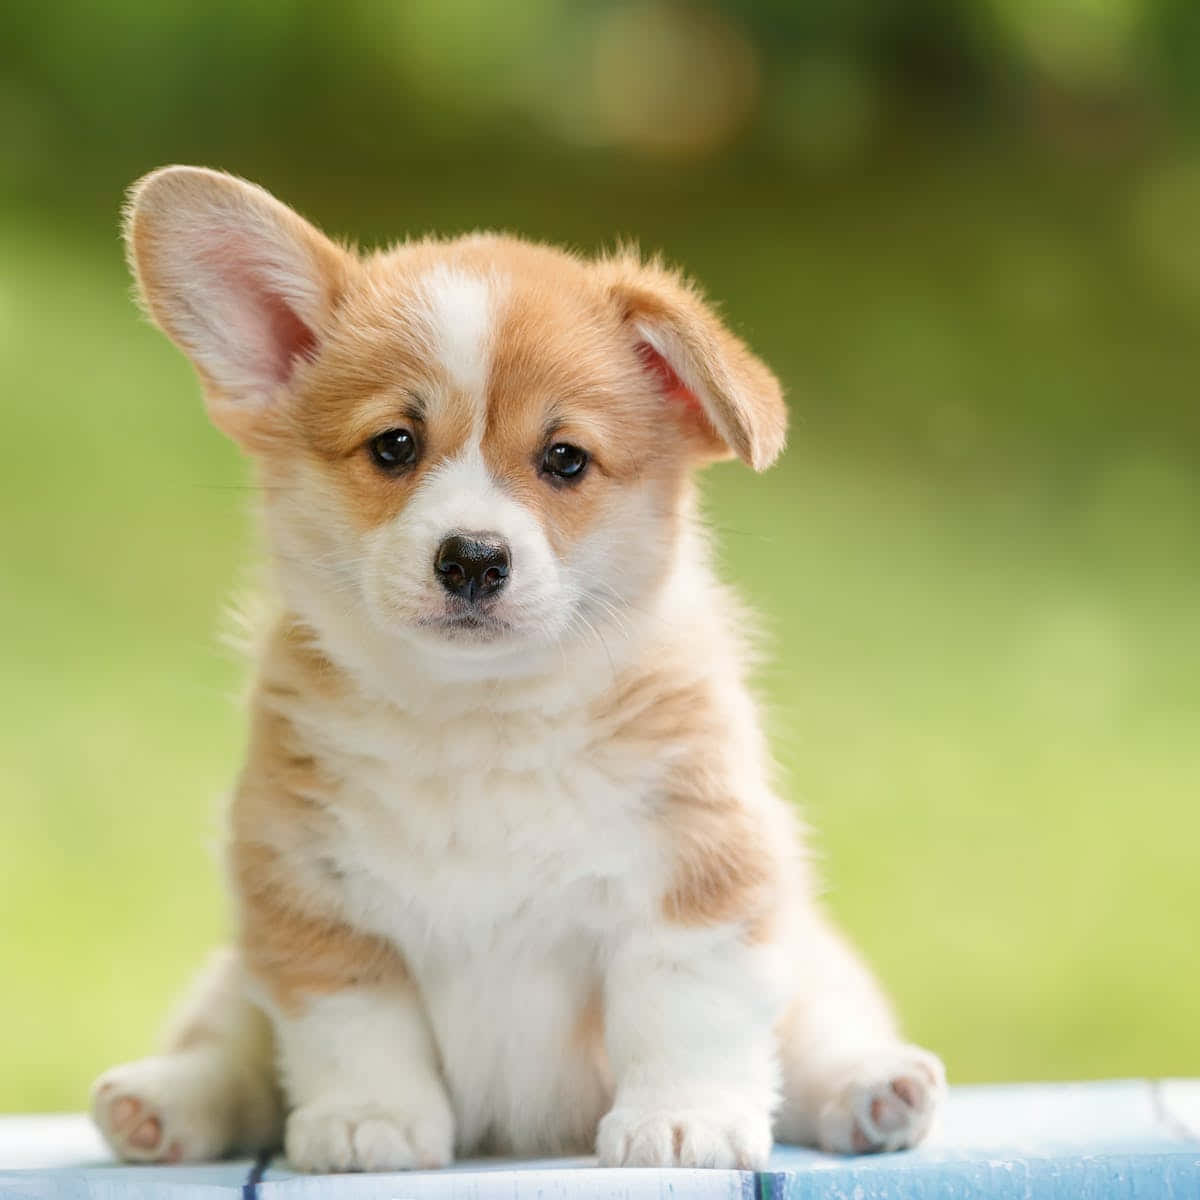 A Small Puppy Sitting On A Blue Table